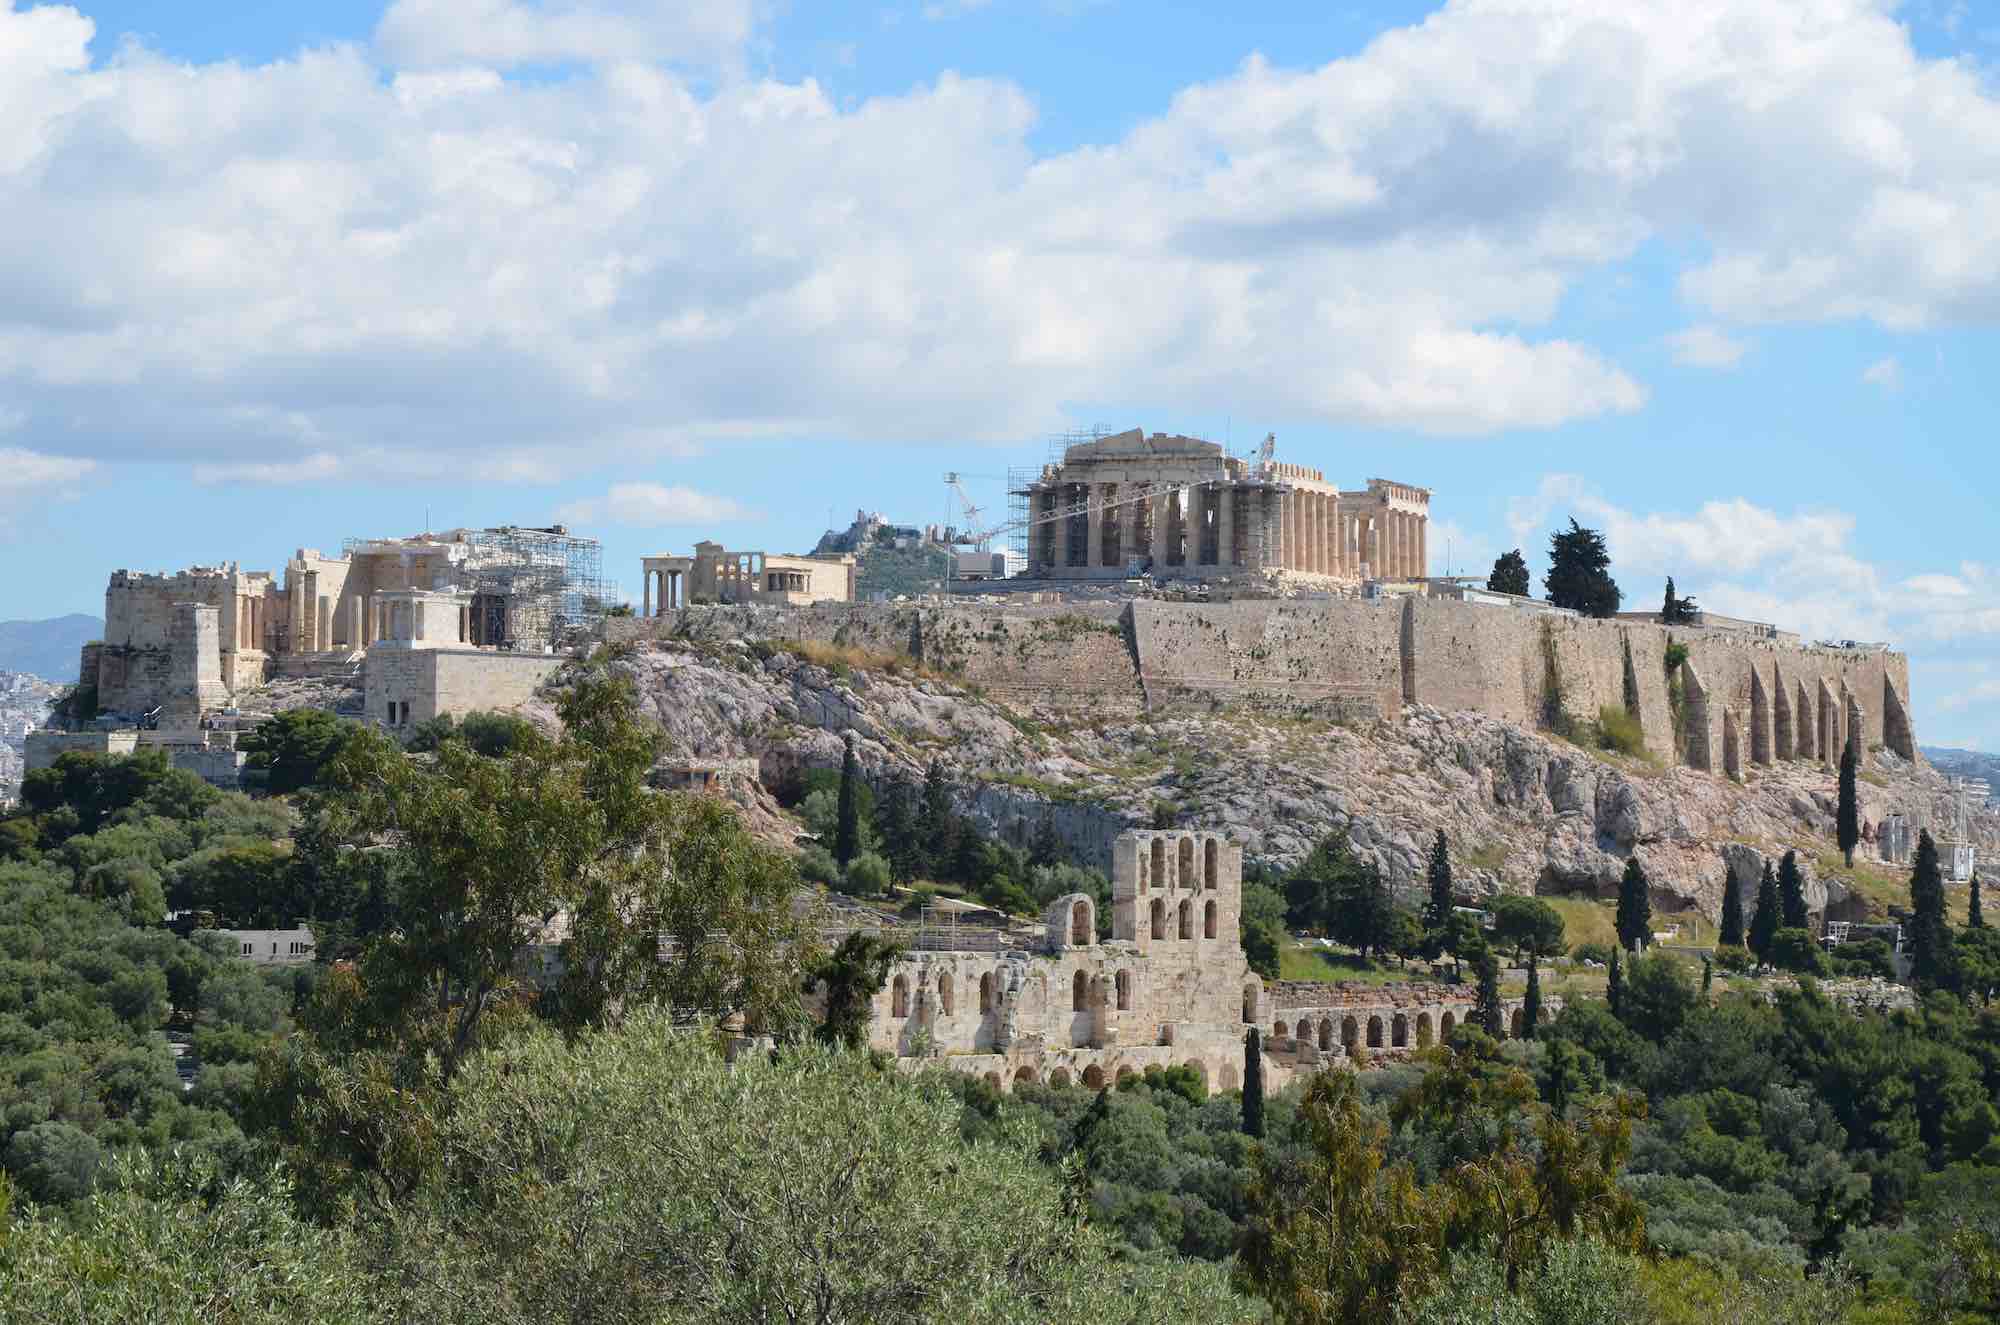 Carole Raddato from FRANKFURT, Germany / CC BY-SA (https://creativecommons.org/licenses/by-sa/2.0); https://commons.wikimedia.org/wiki/File:The_Acropolis_of_Athens_viewed_from_the_Hill_of_the_Muses_(14220794964).jpg